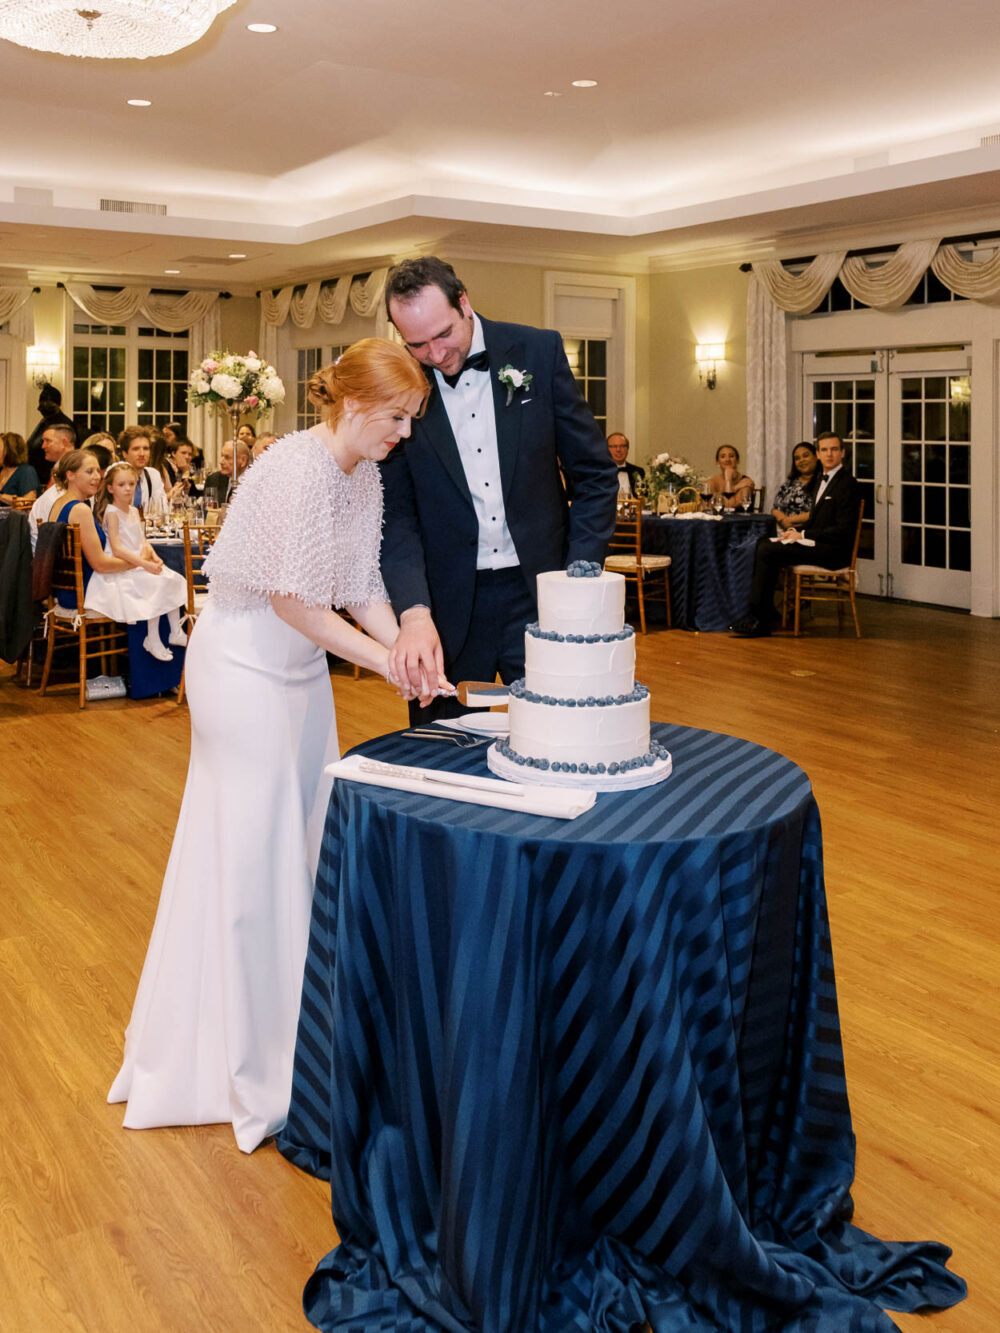 Bride and groom cake cutting at Glidden House